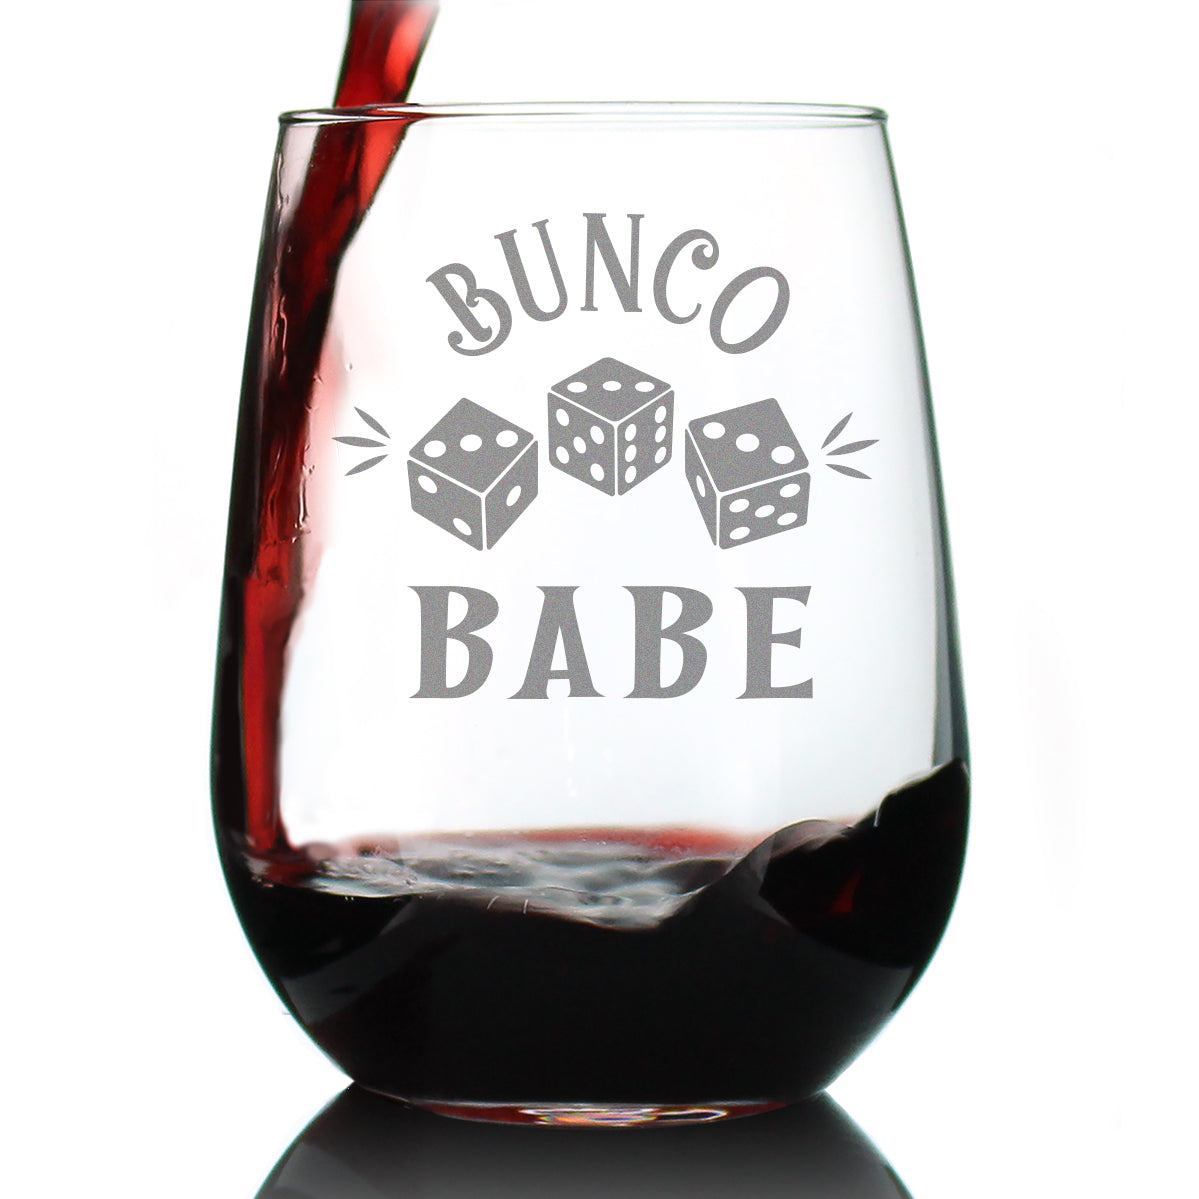 Bunco Babe Stemless Wine Glass - Bunco Decor and Bunco Gifts for Women - Large 17 Oz Glasses